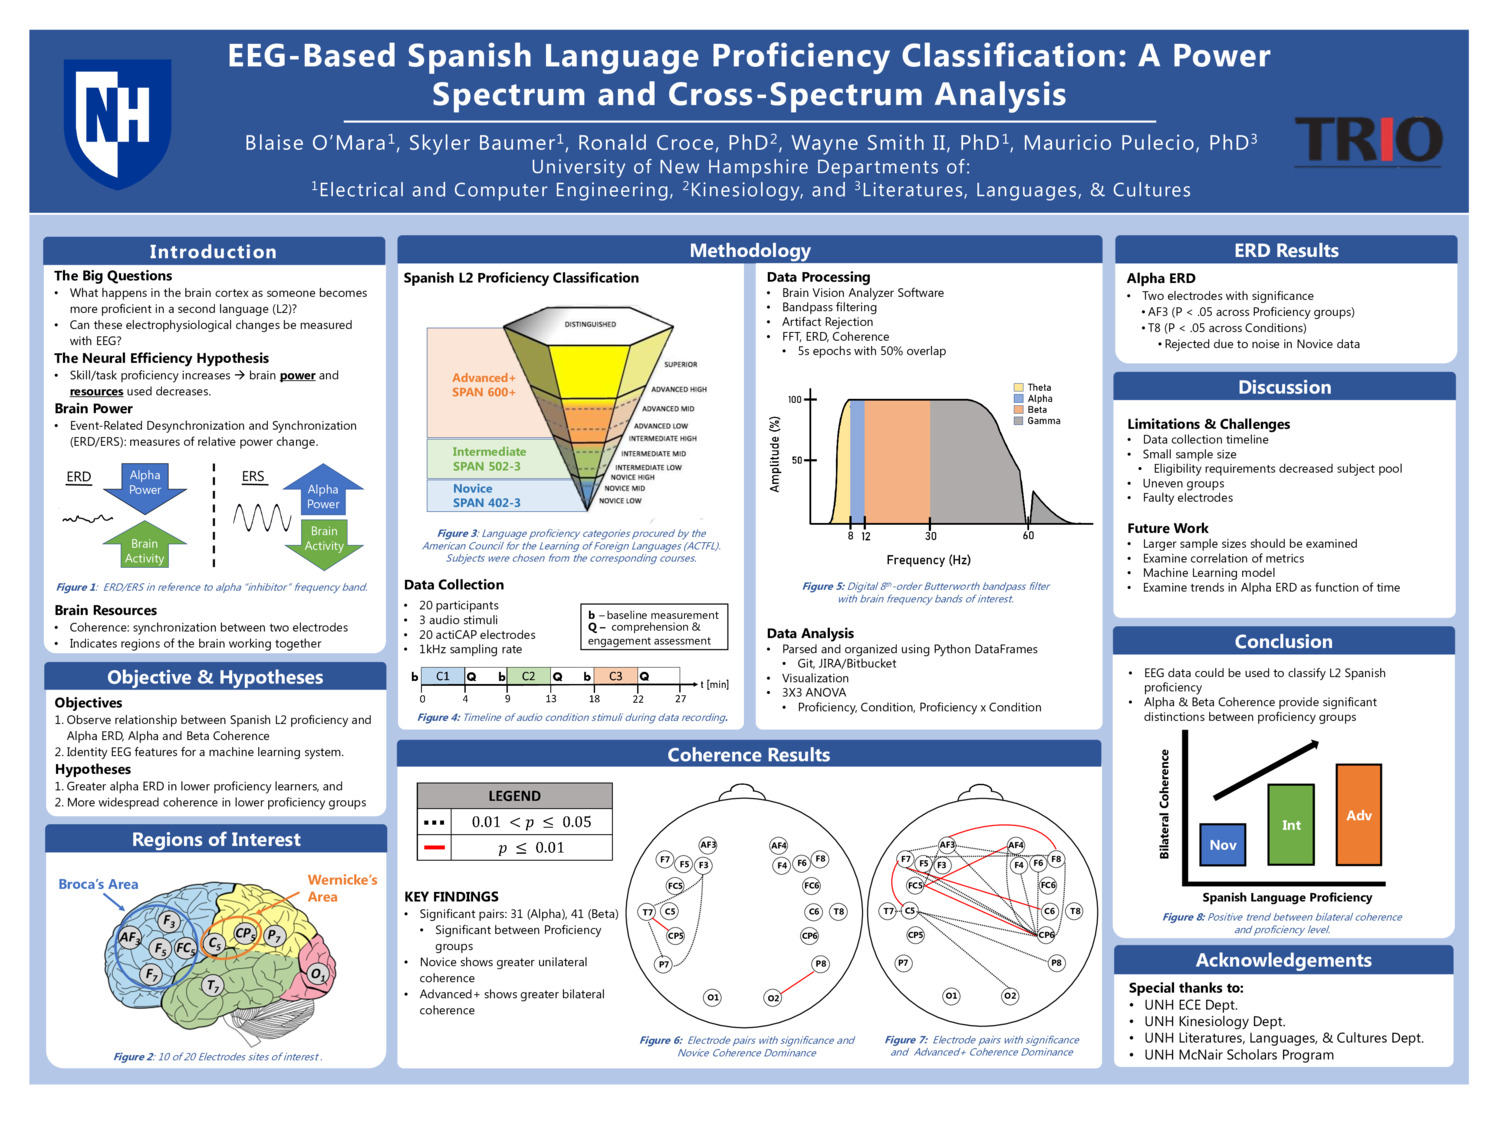 Eeg-Based Spanish Language Proficiency Classification: A Power Spectrum And Cross-Spectrum Analysis by bxo1000